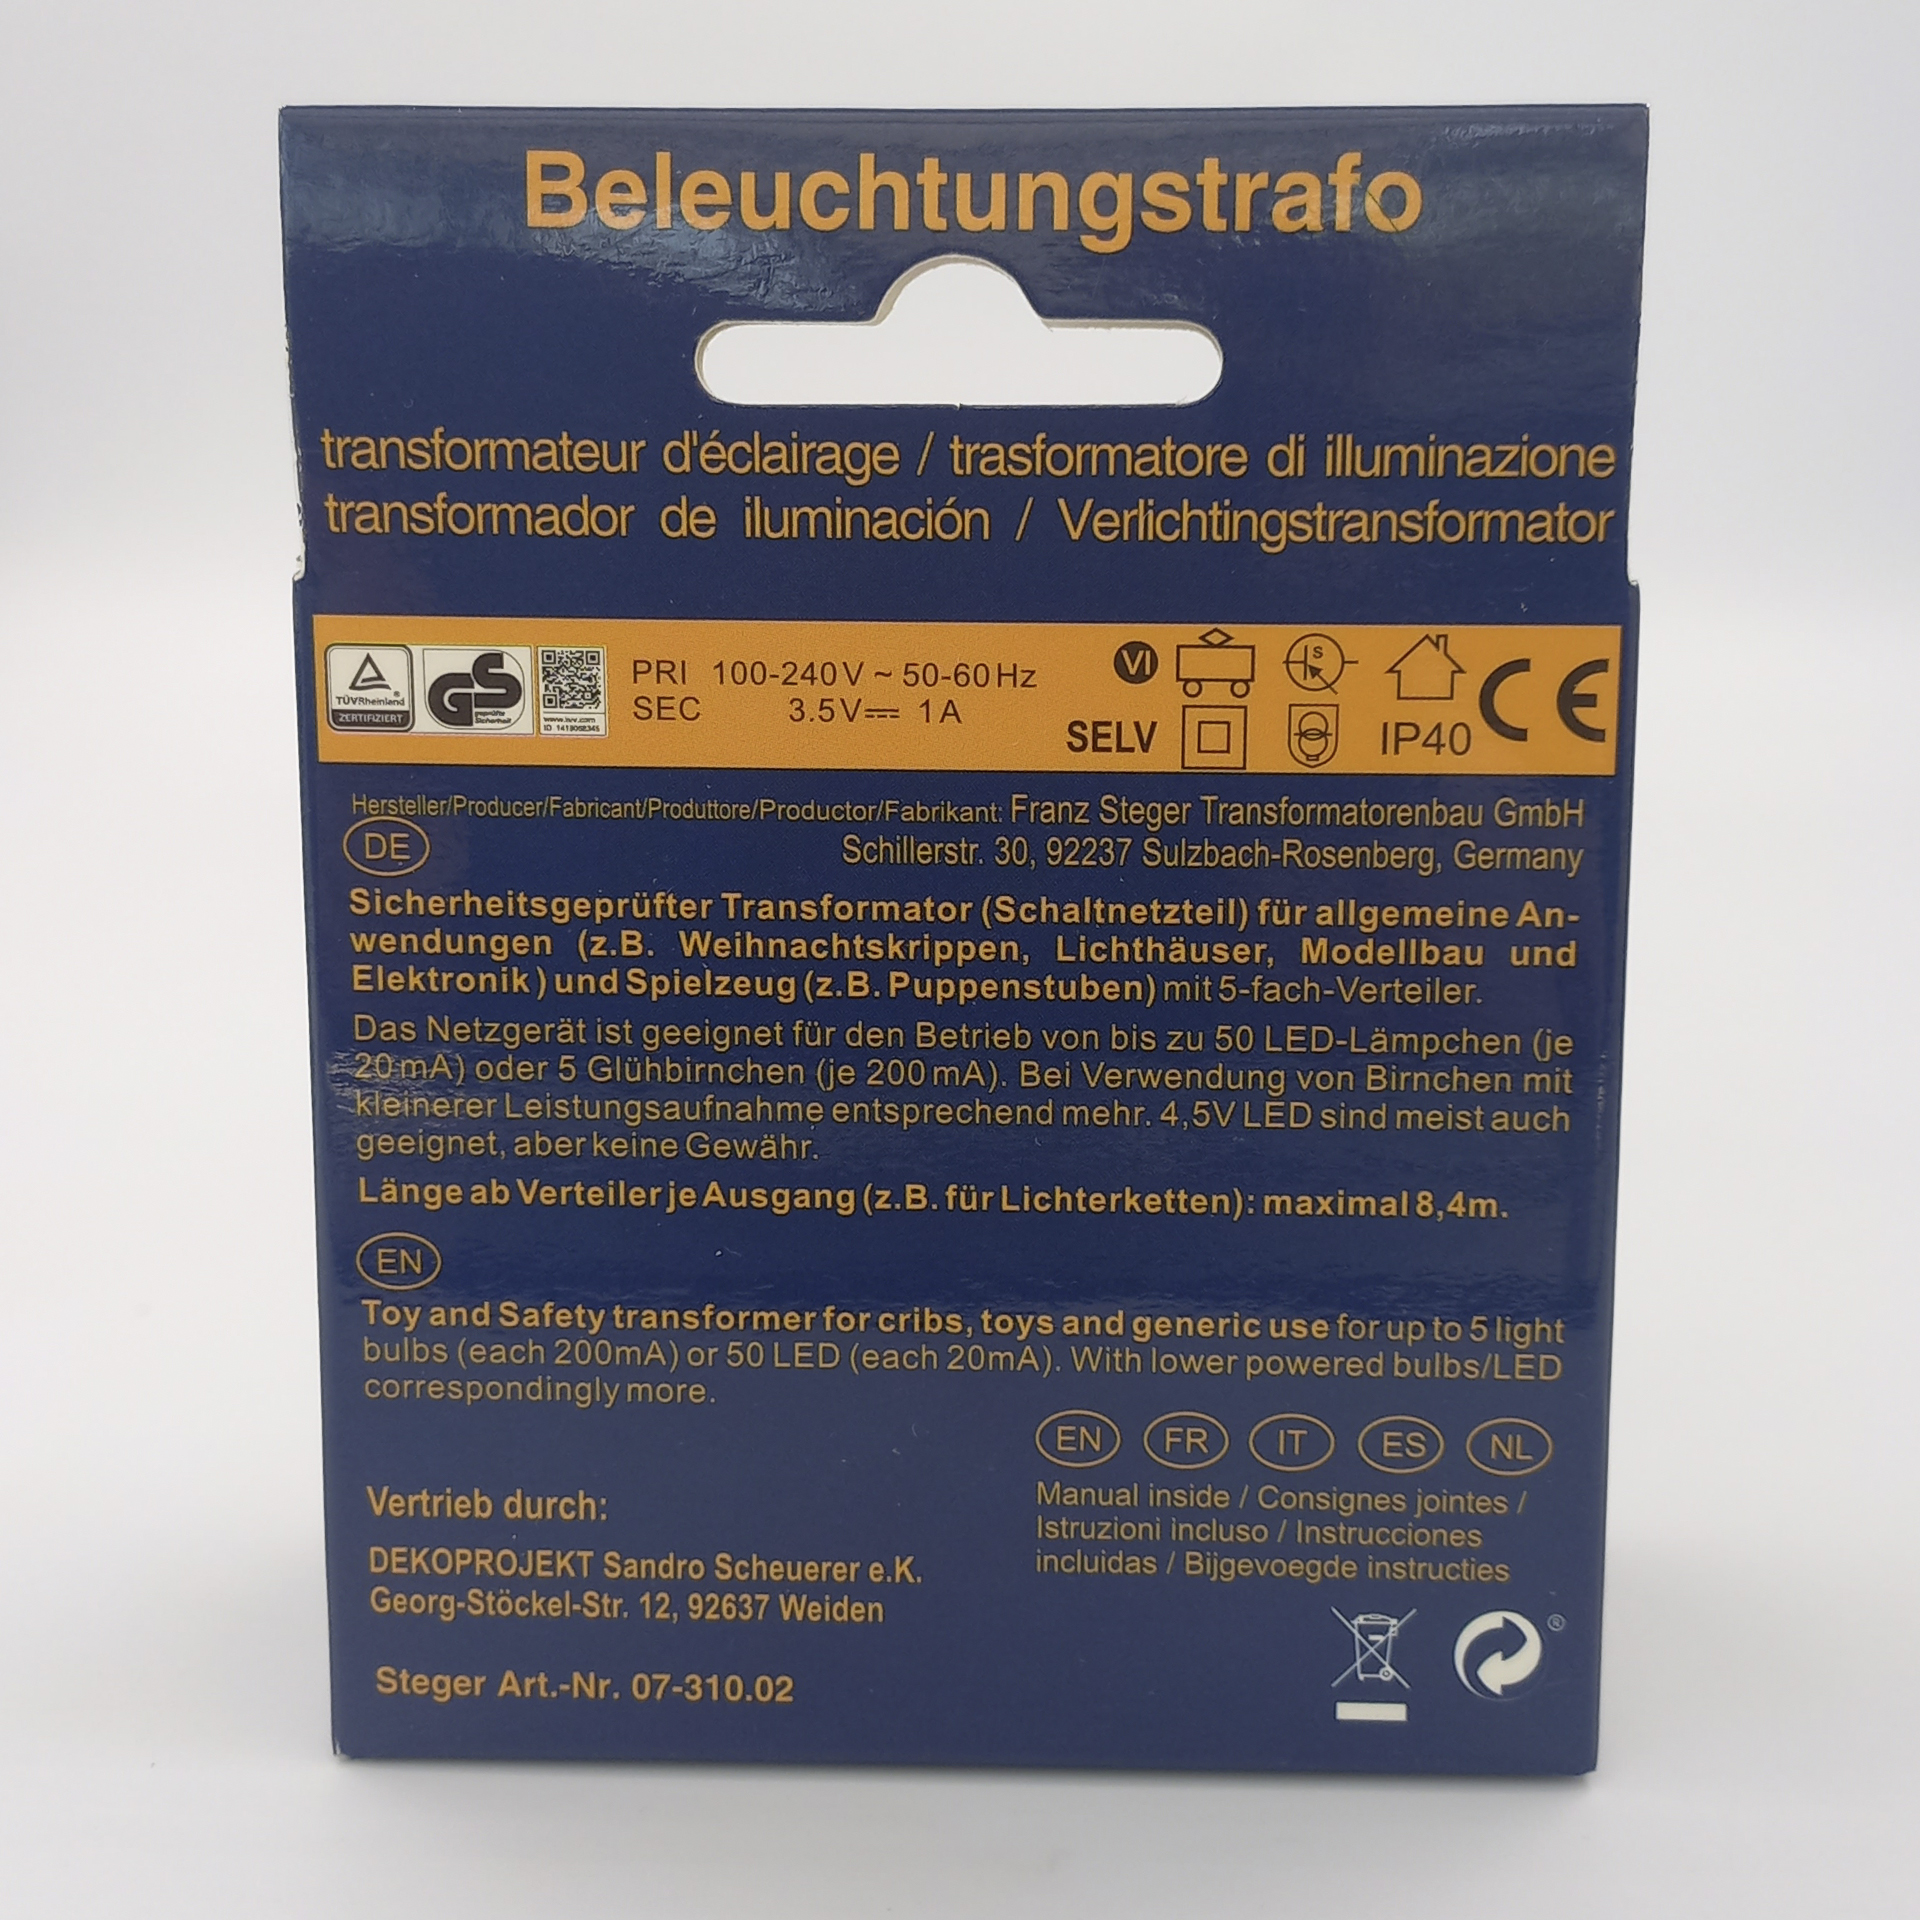 Beleuchtungstrafo LED-fähig, 5-fach